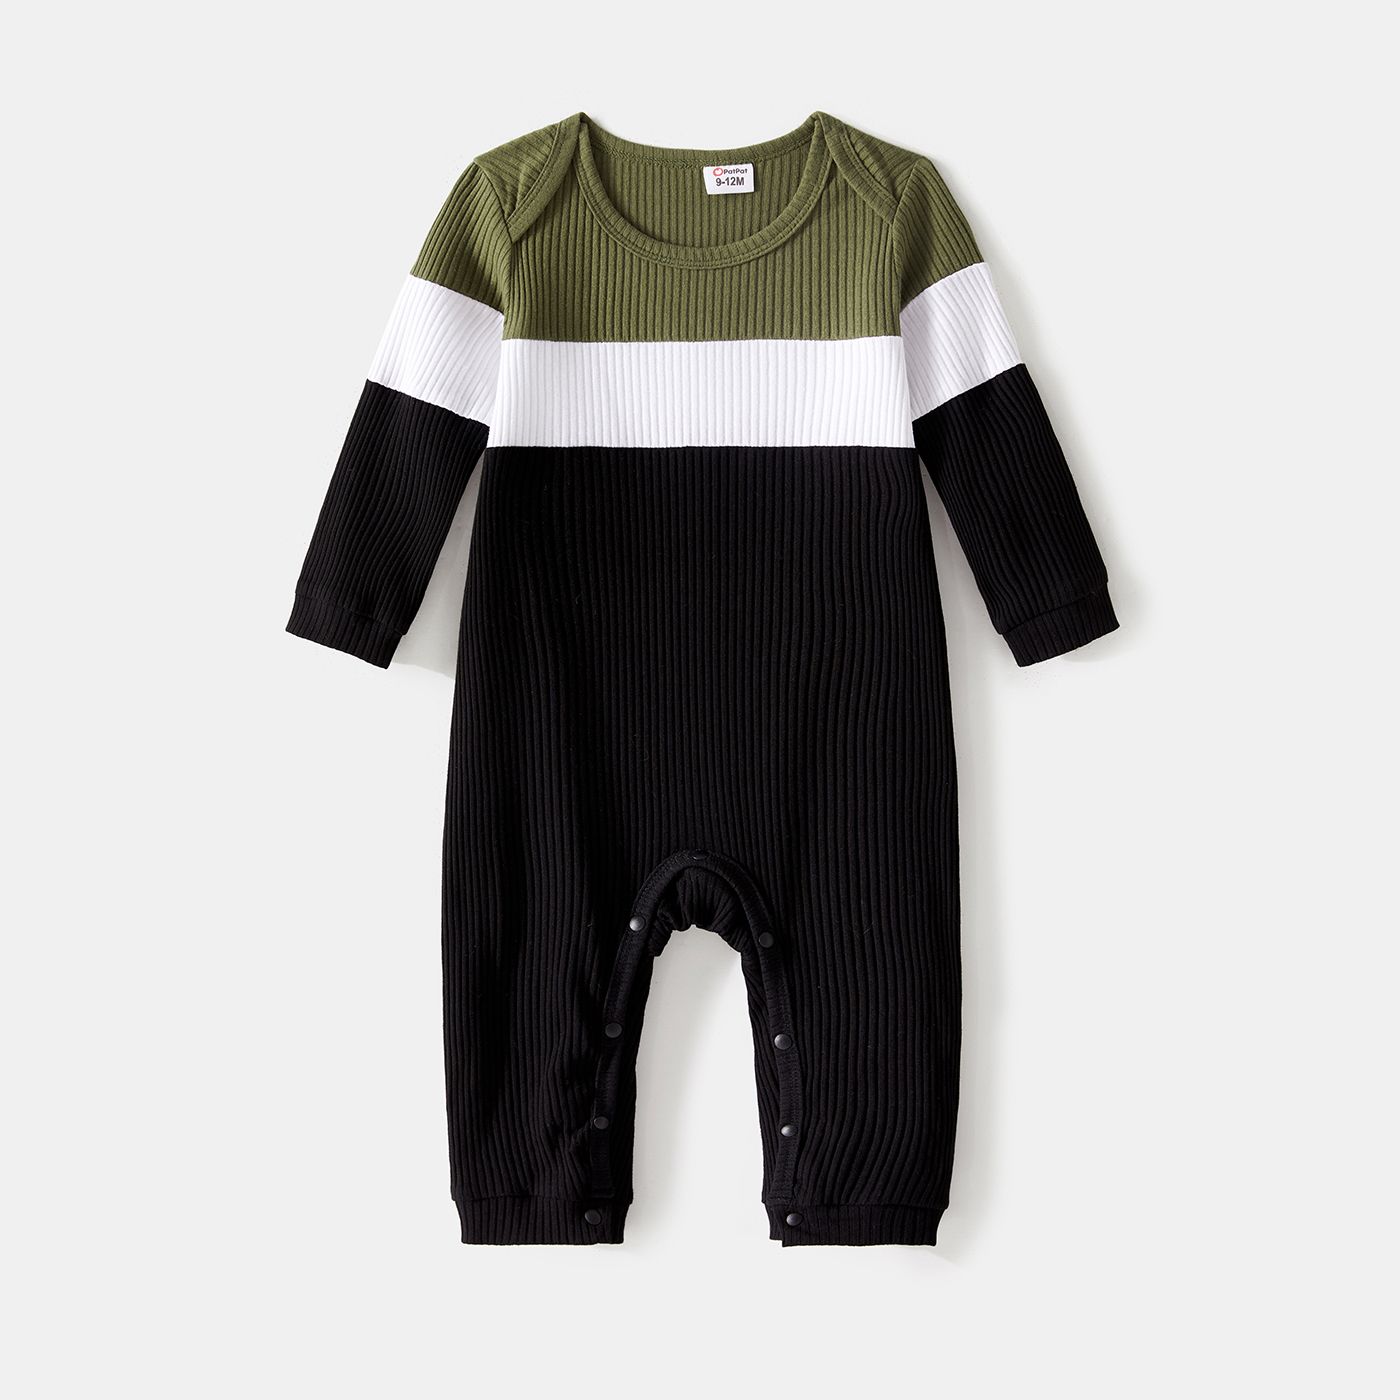 Family Matching Long-sleeve Button Front Solid Spliced Dresses And Colorblock Rib Knit Tops Sets